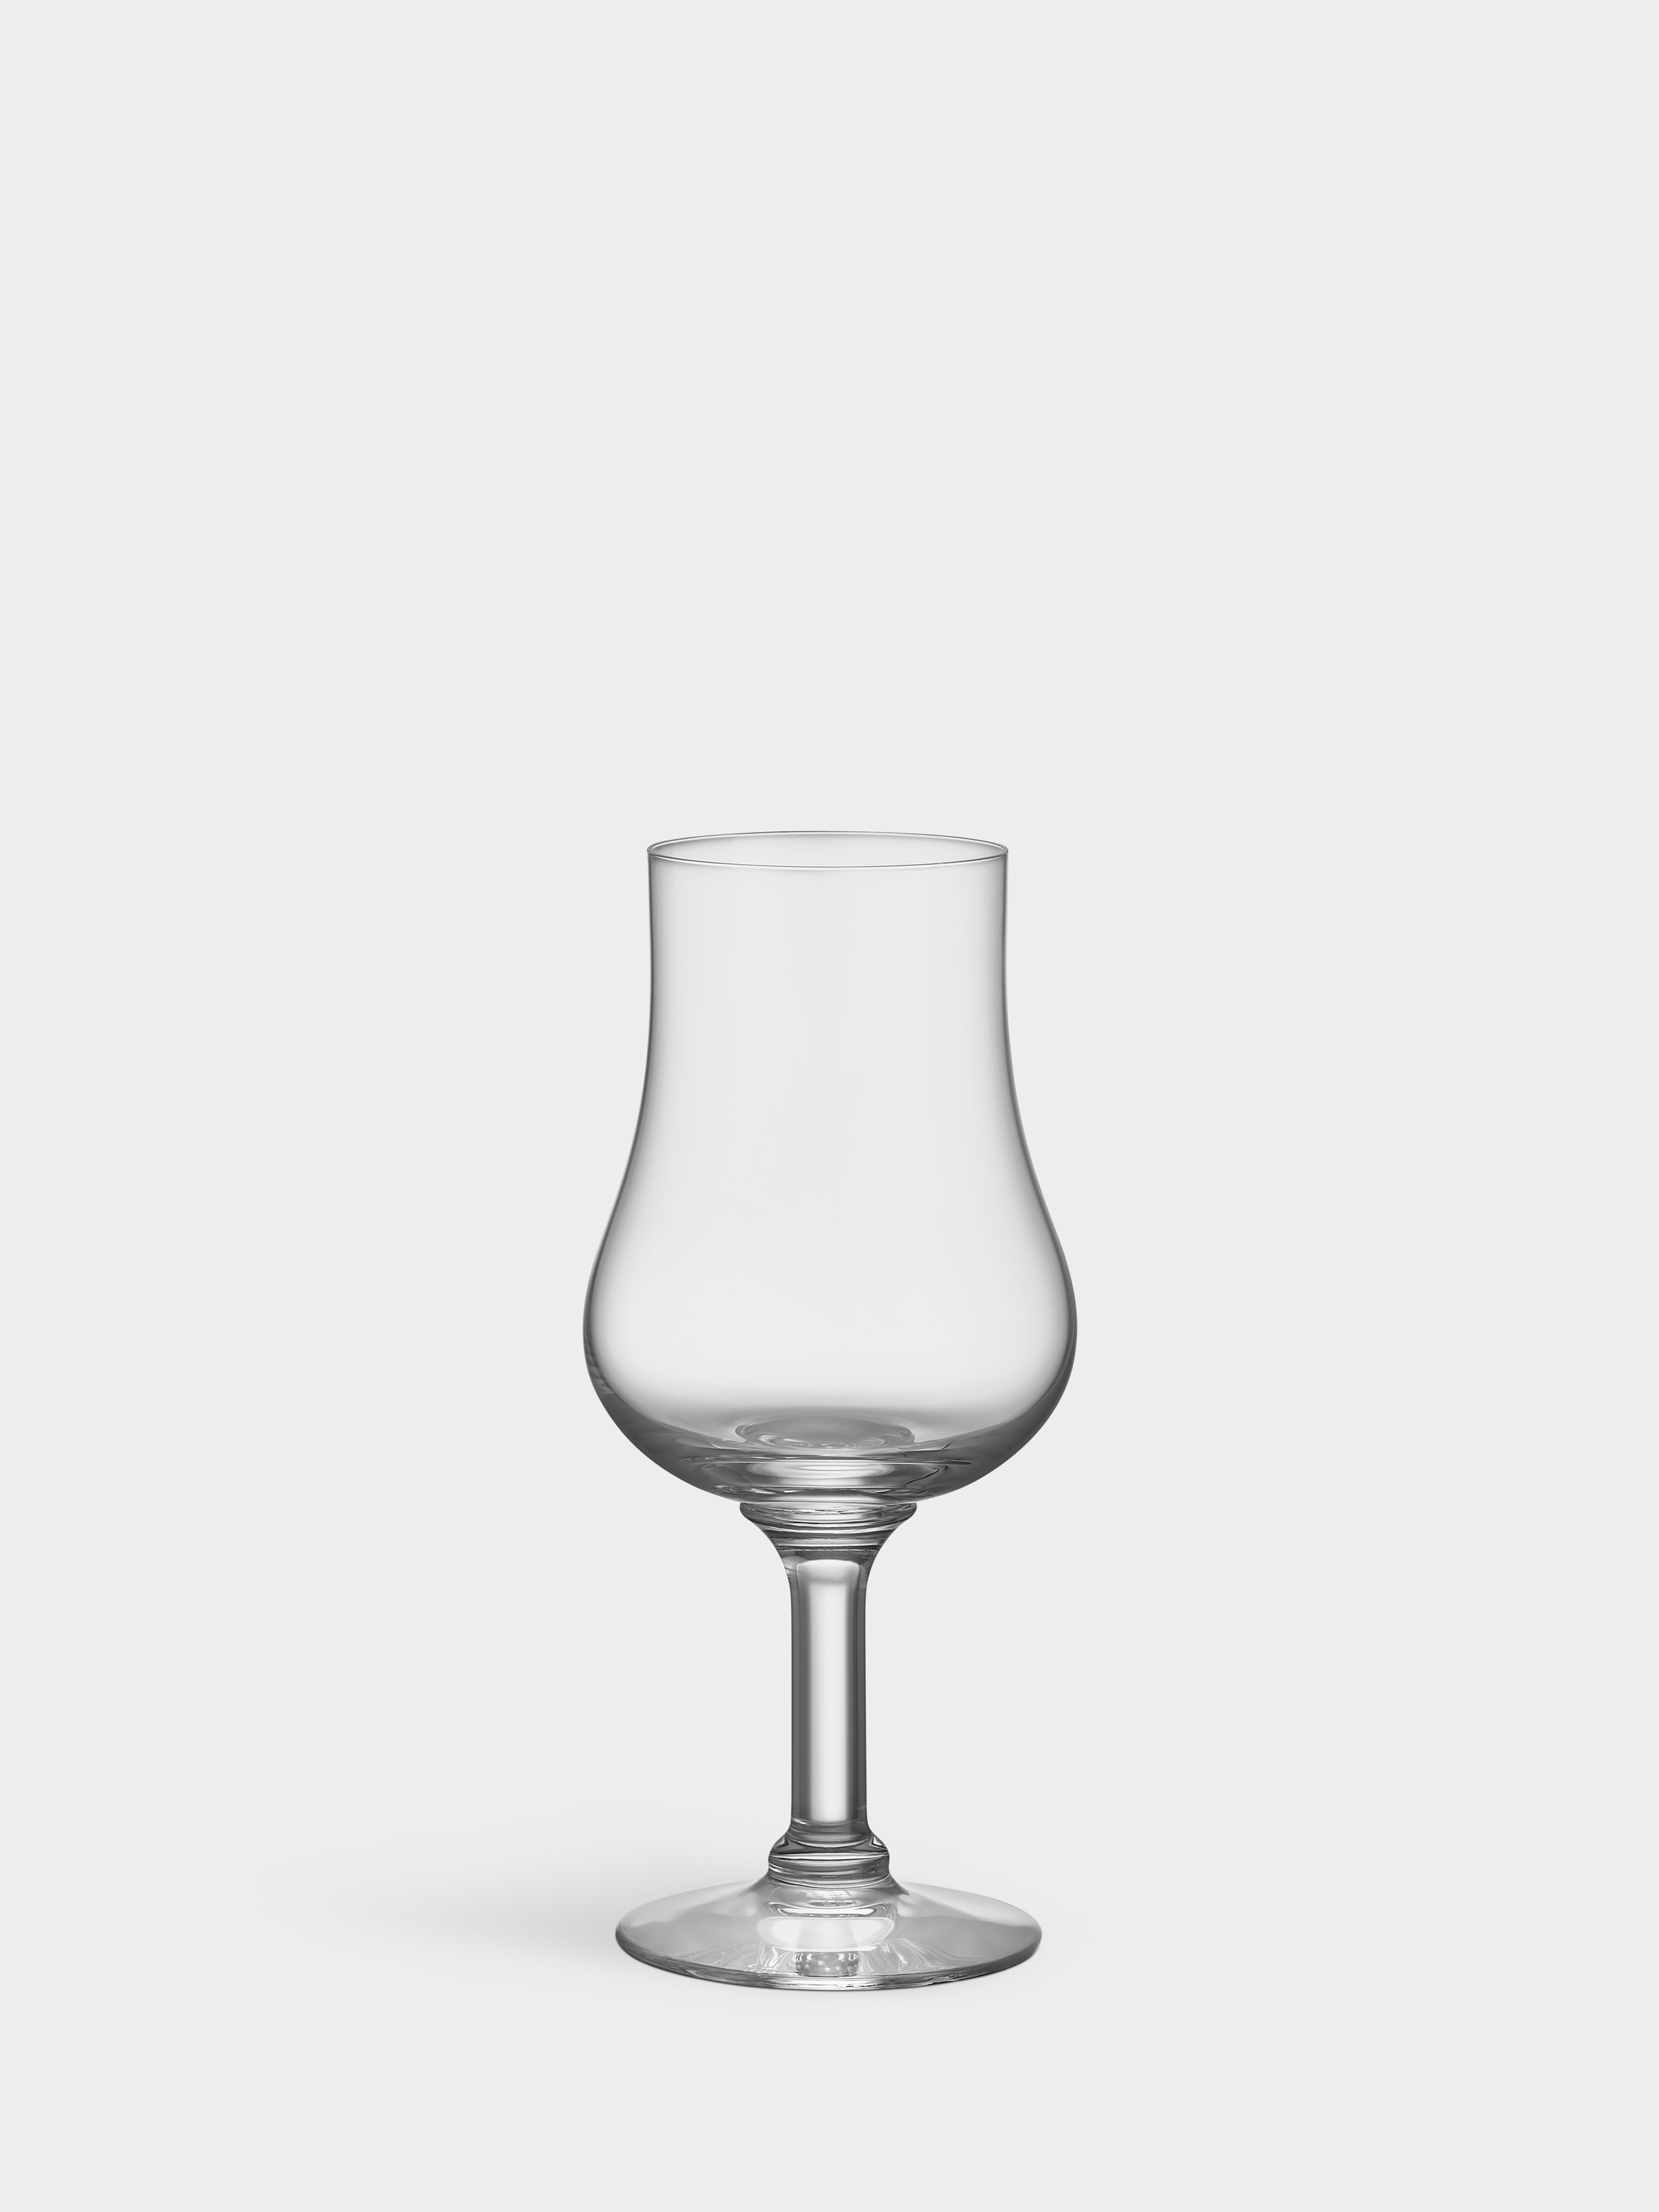 https://orrefors-products.imgix.net/images/754_3ab7be37a8-6614004_elixir_wine-tasting-glass_4-pack_orrefors_pro_01_3x4-original.jpg